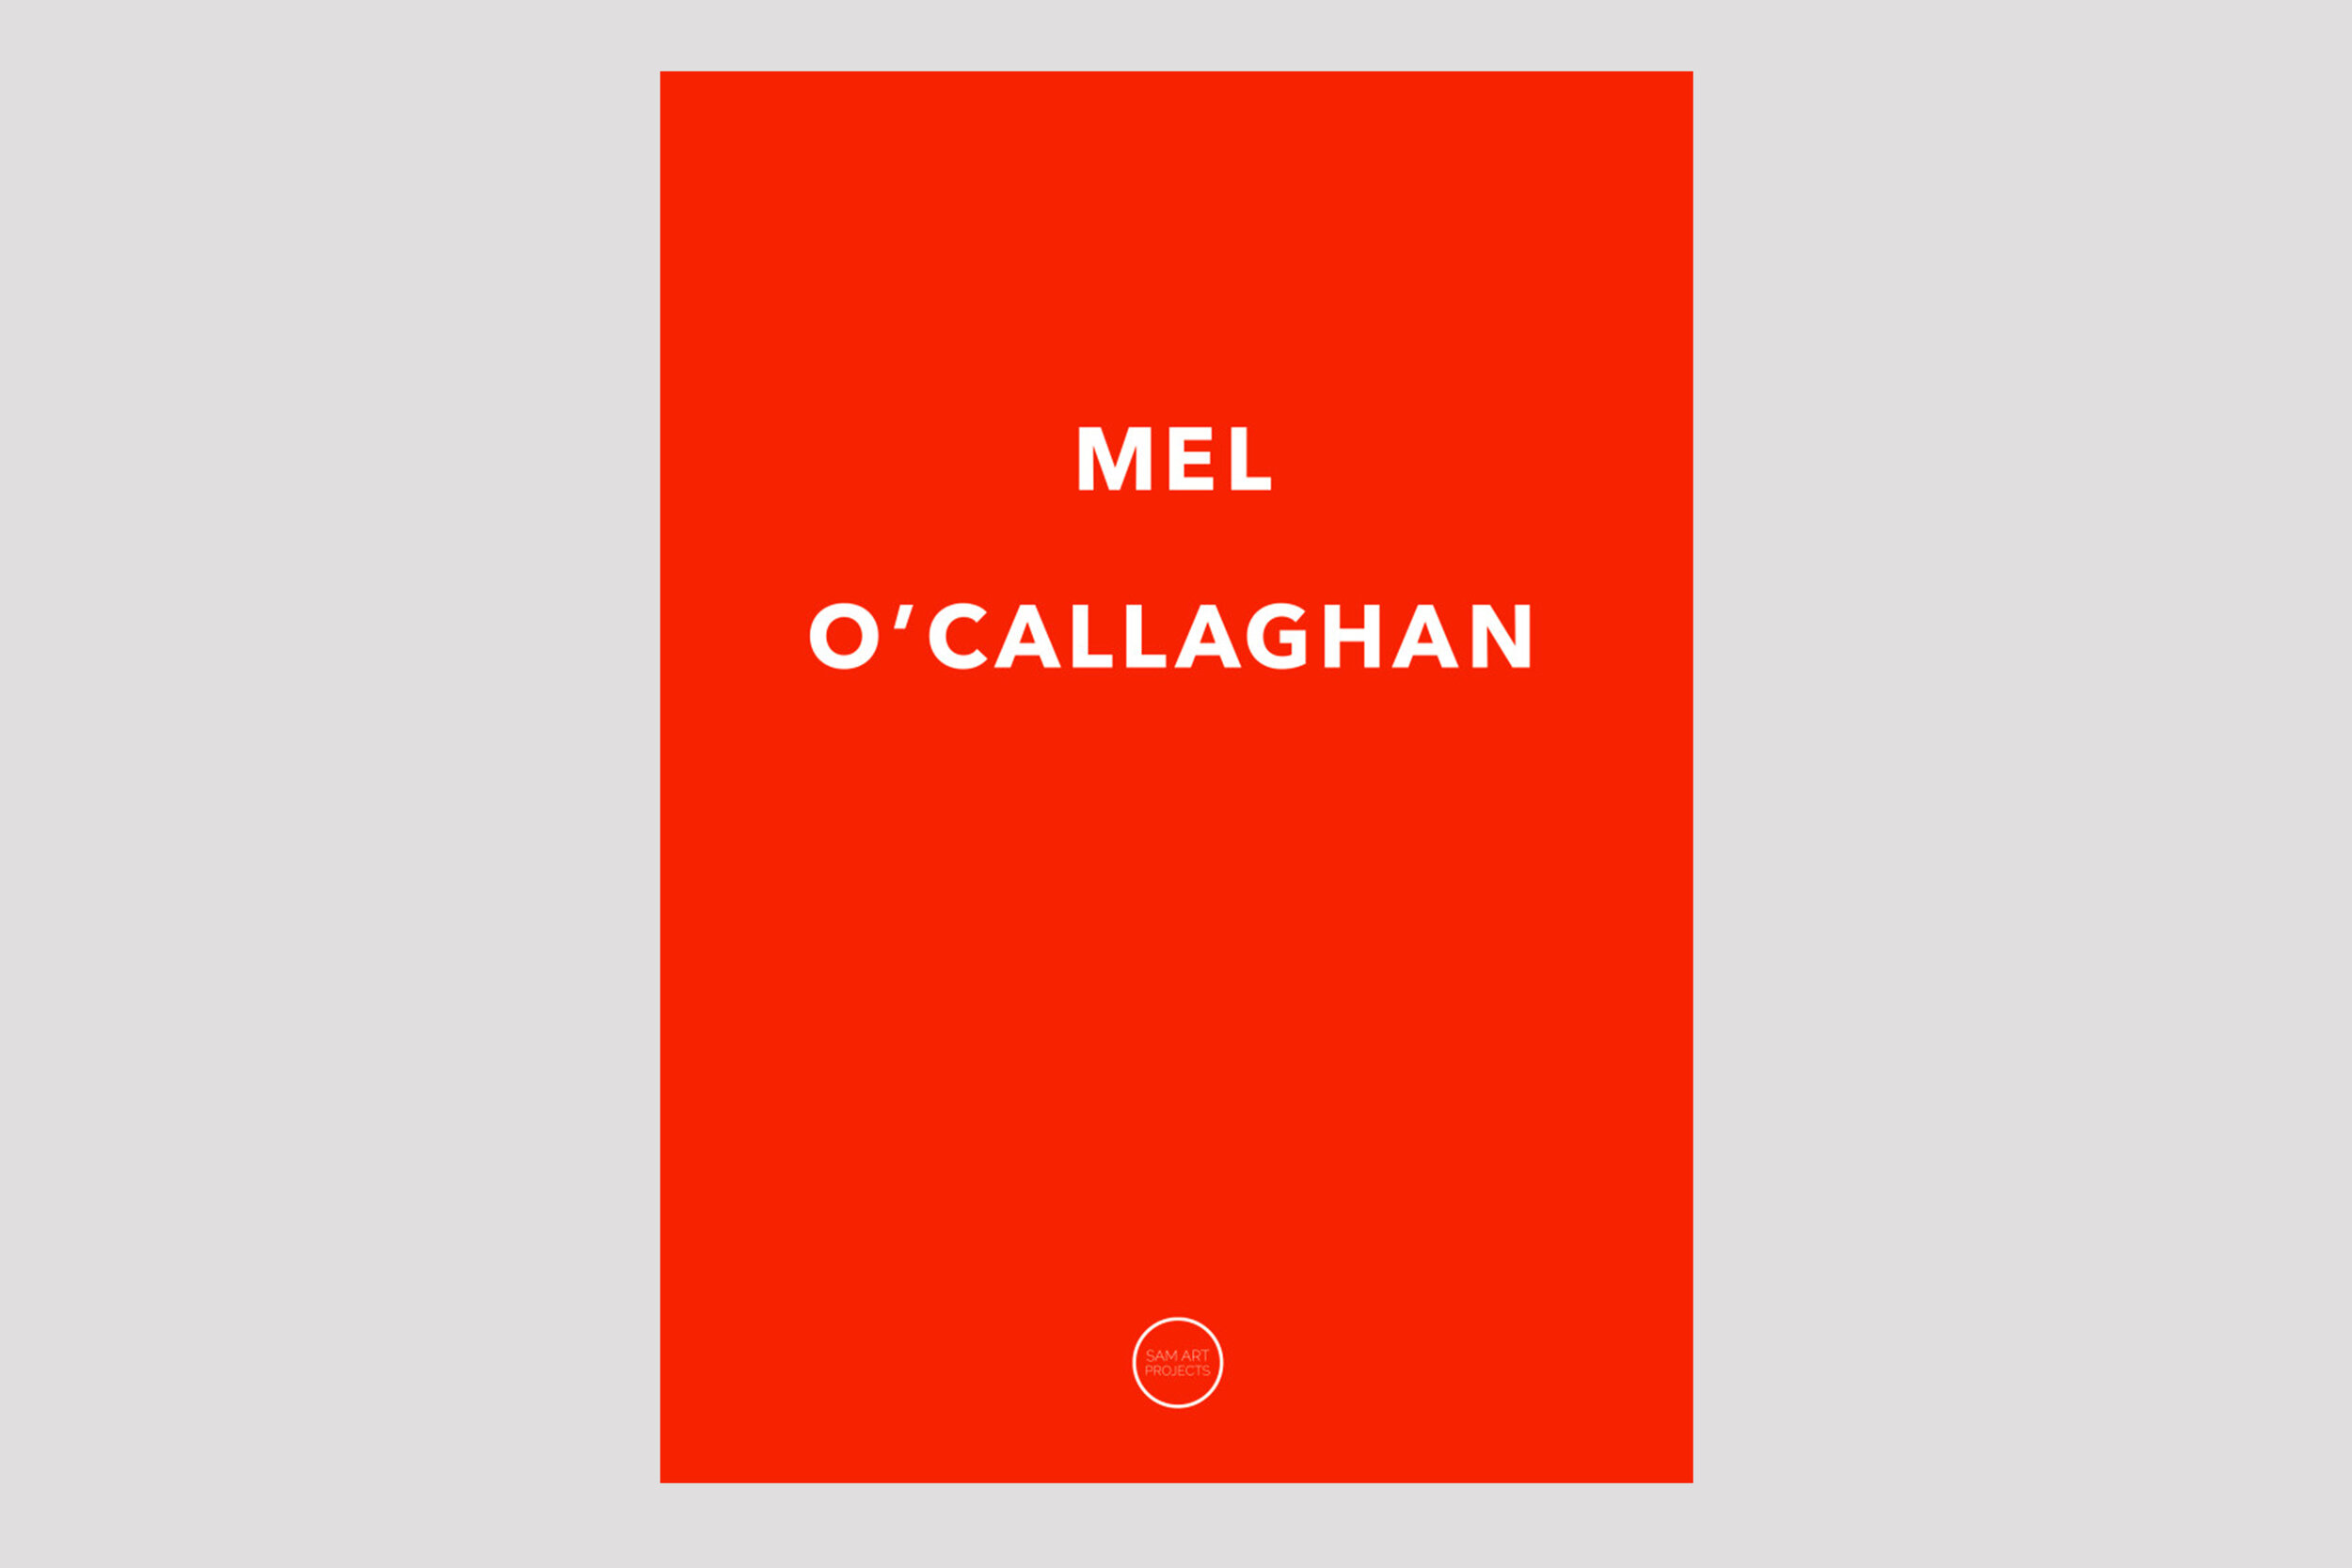 MEL O'CALLAGHAN - Dangerous-on-the-way